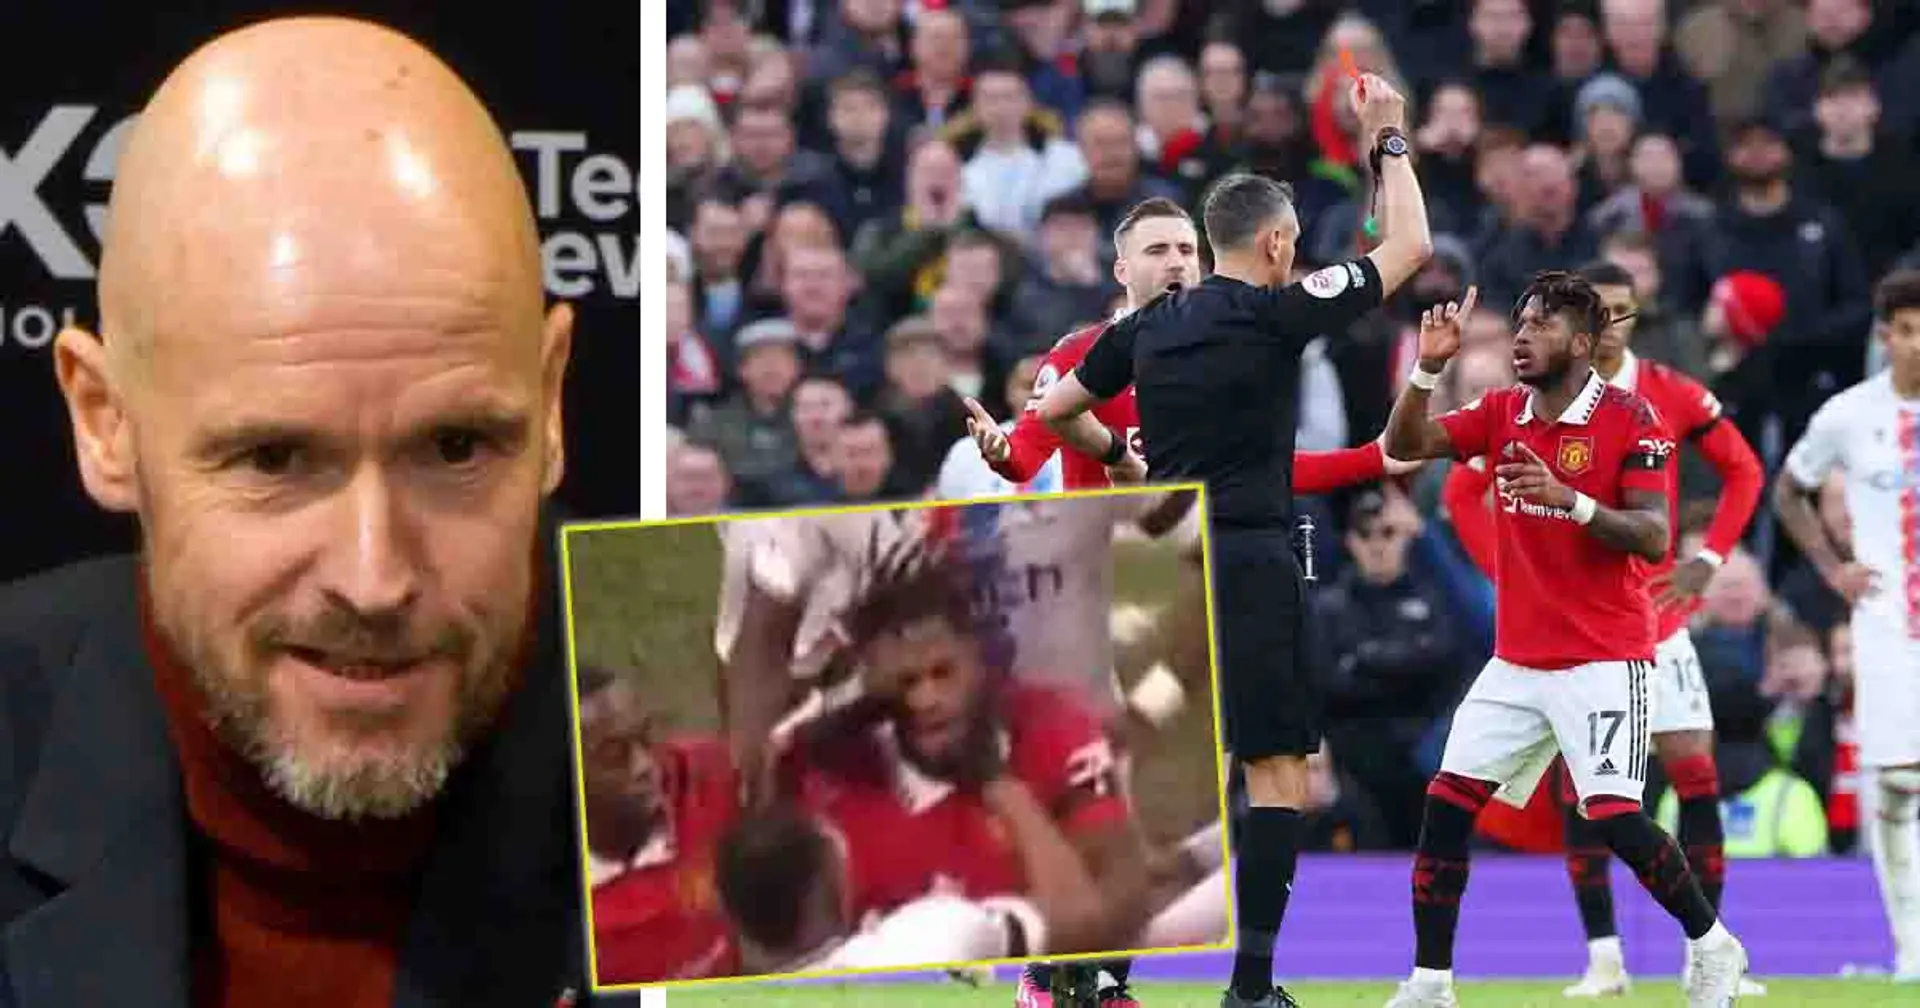 Ten Hag indicates one Palace player should've seen red for attacking Fred - shown in pic